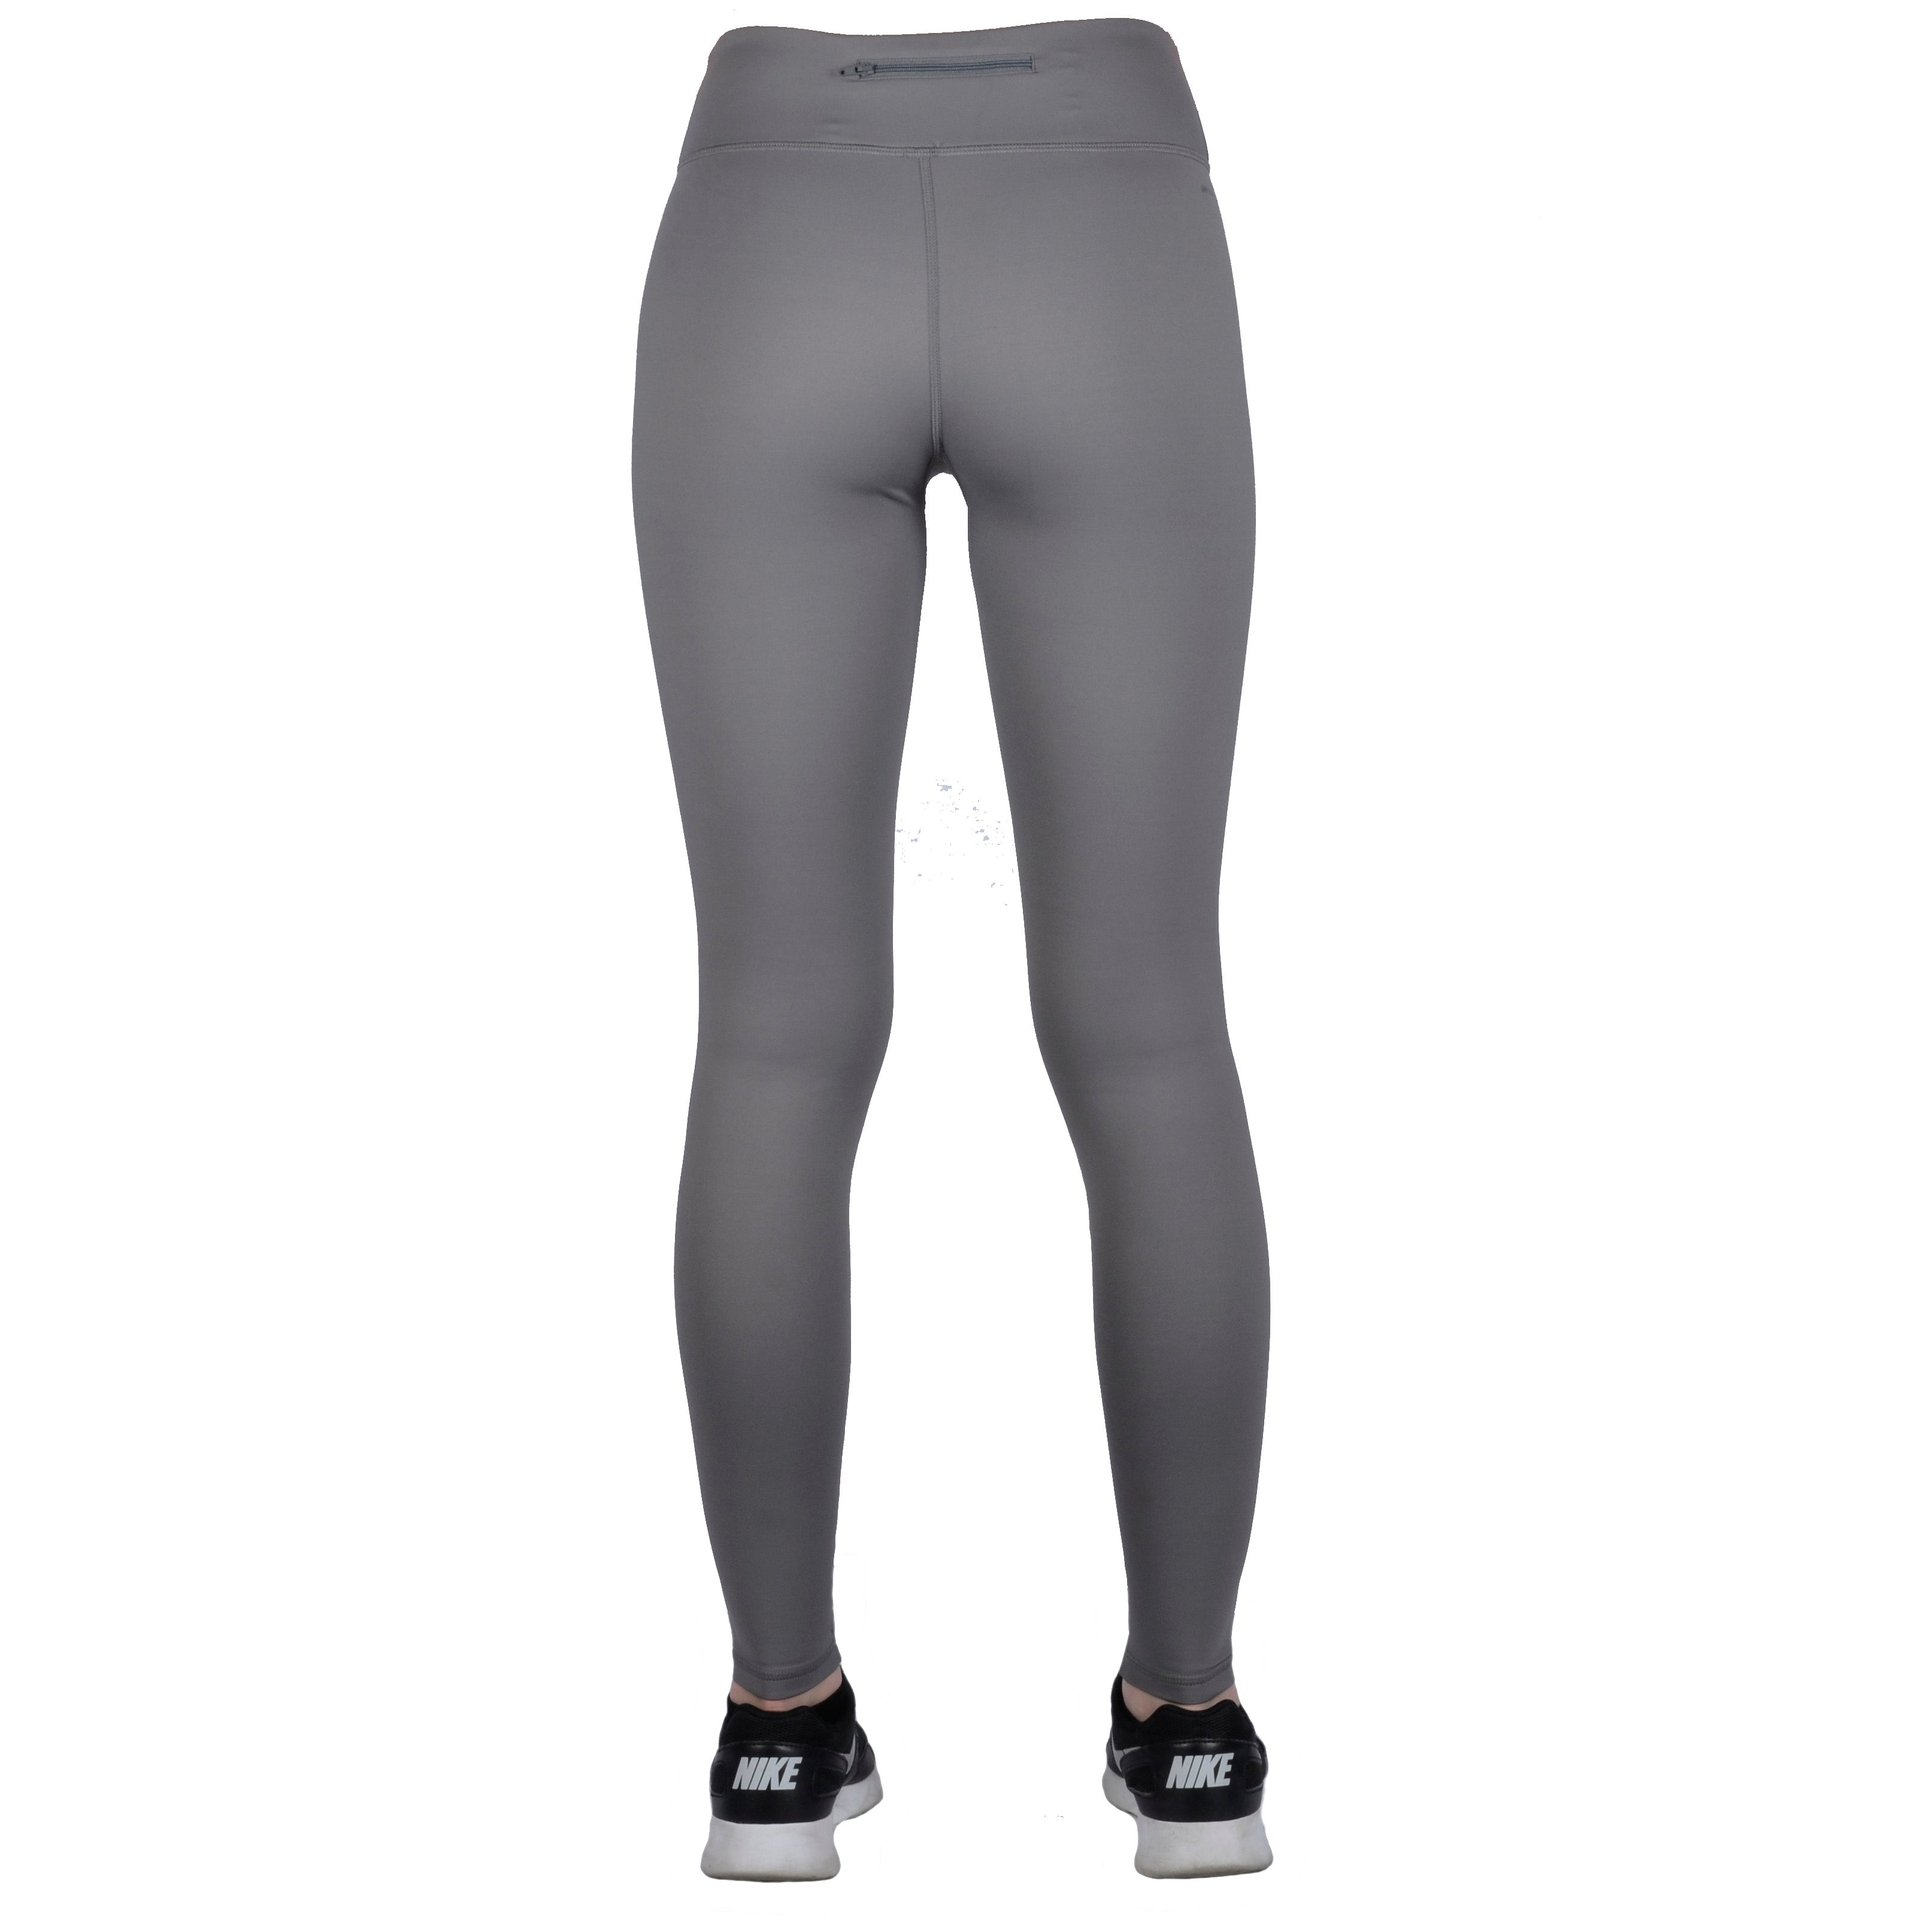 Zeet RECOVERY COMPRESSION PANTS LEGGINGS Gray Size 0 C63